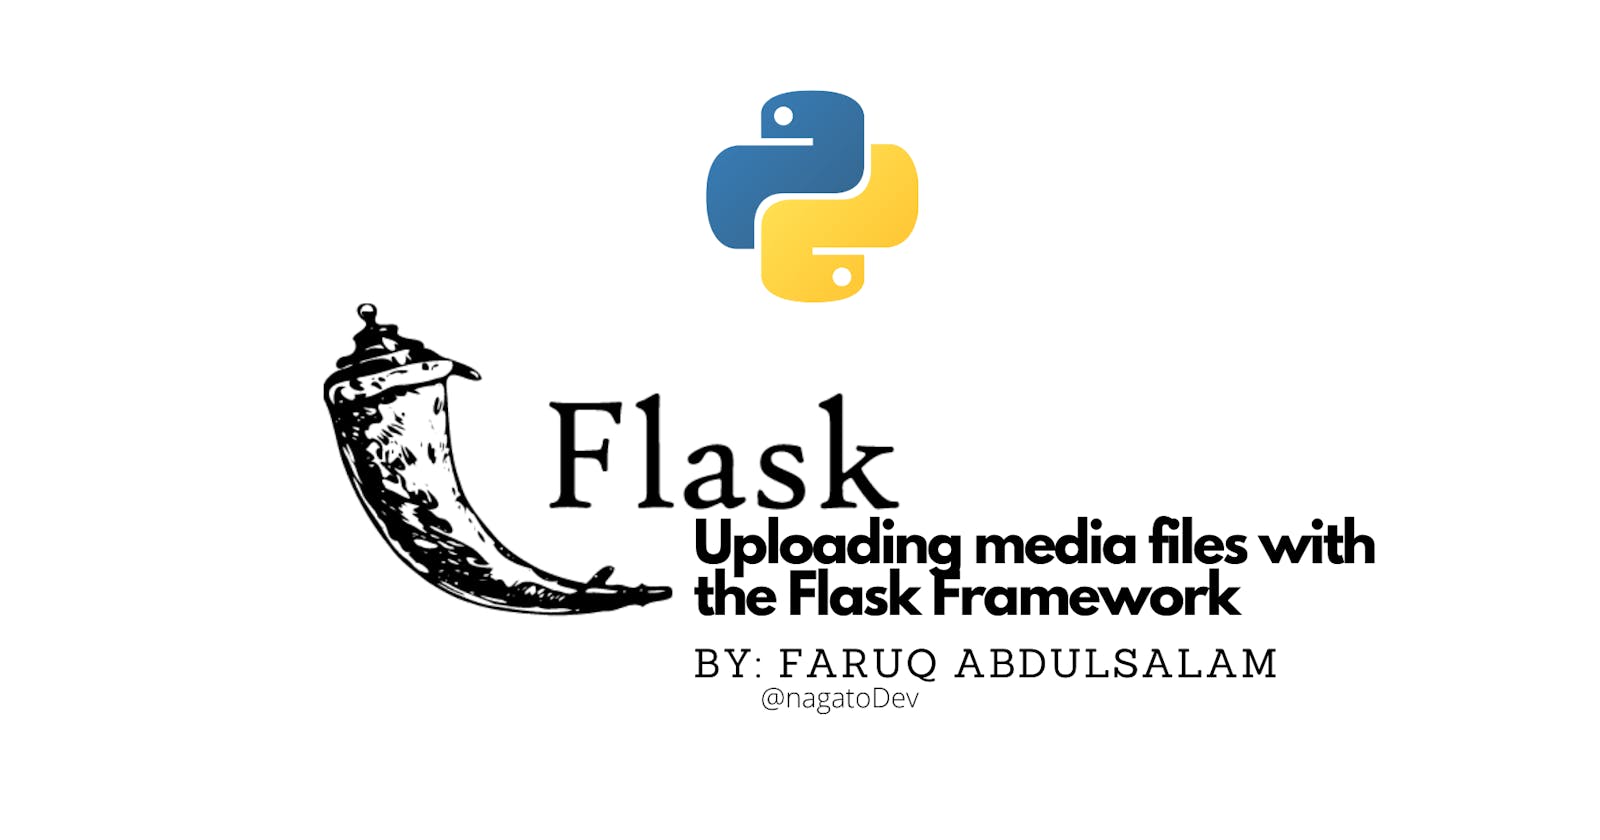 Uploading media files to your Flask application